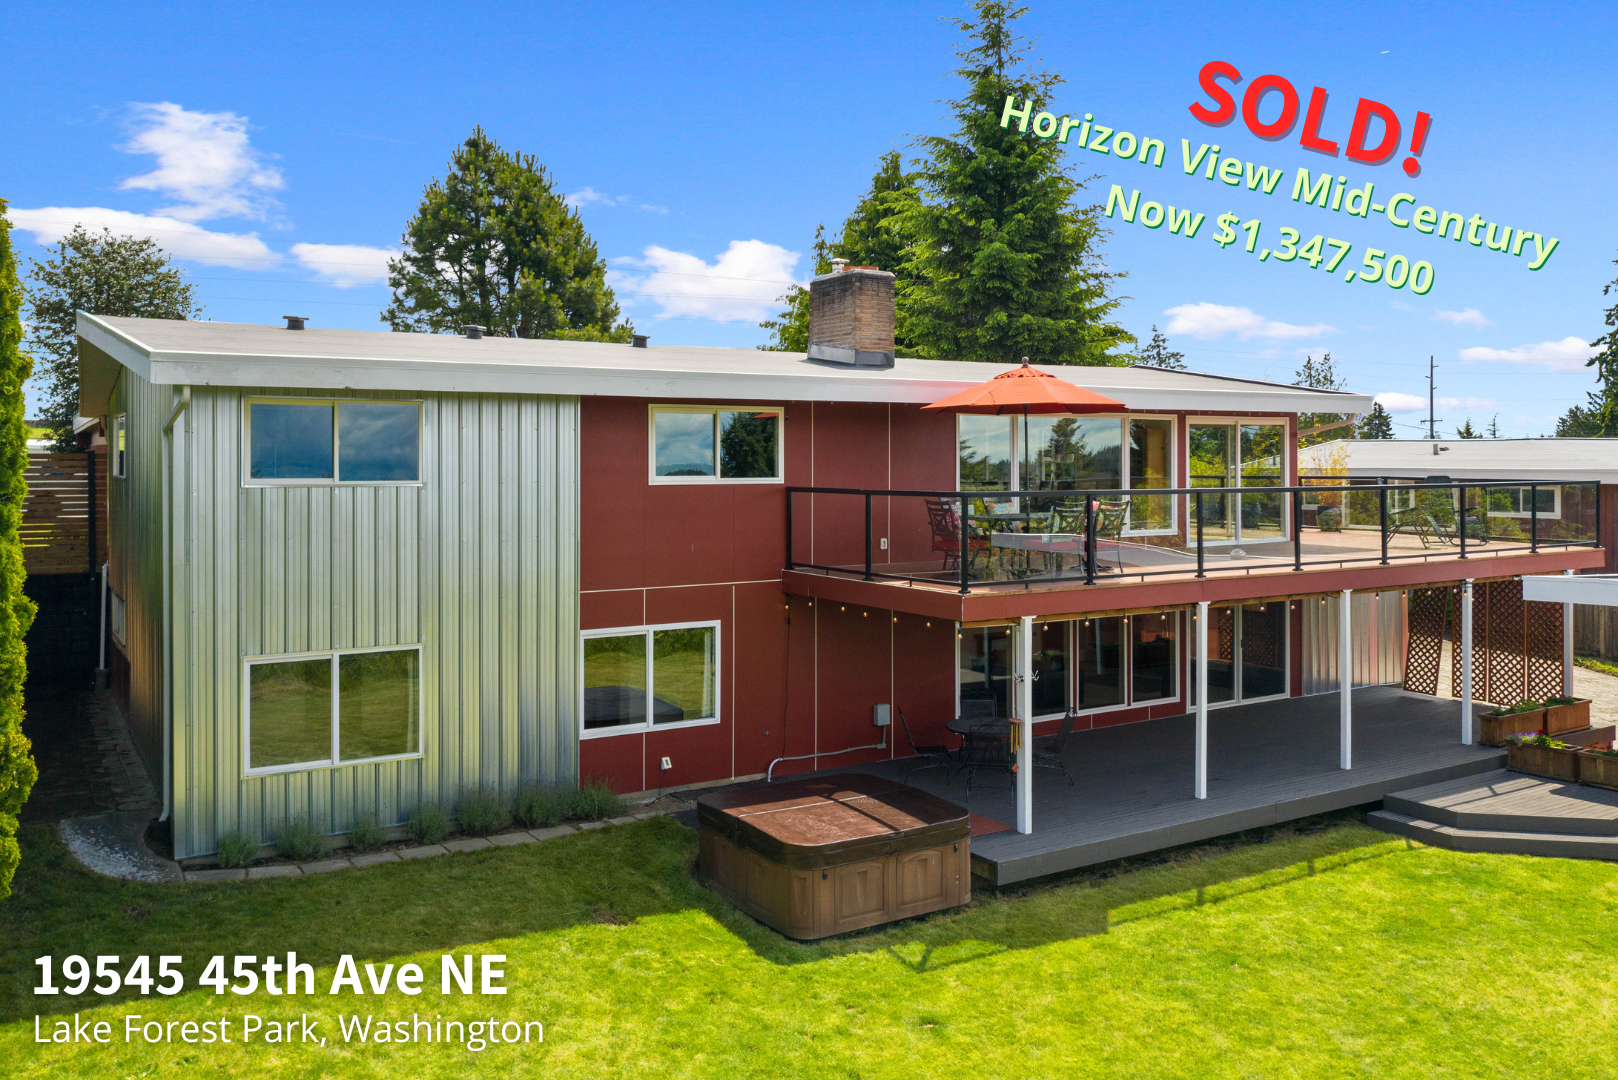 SOLD!